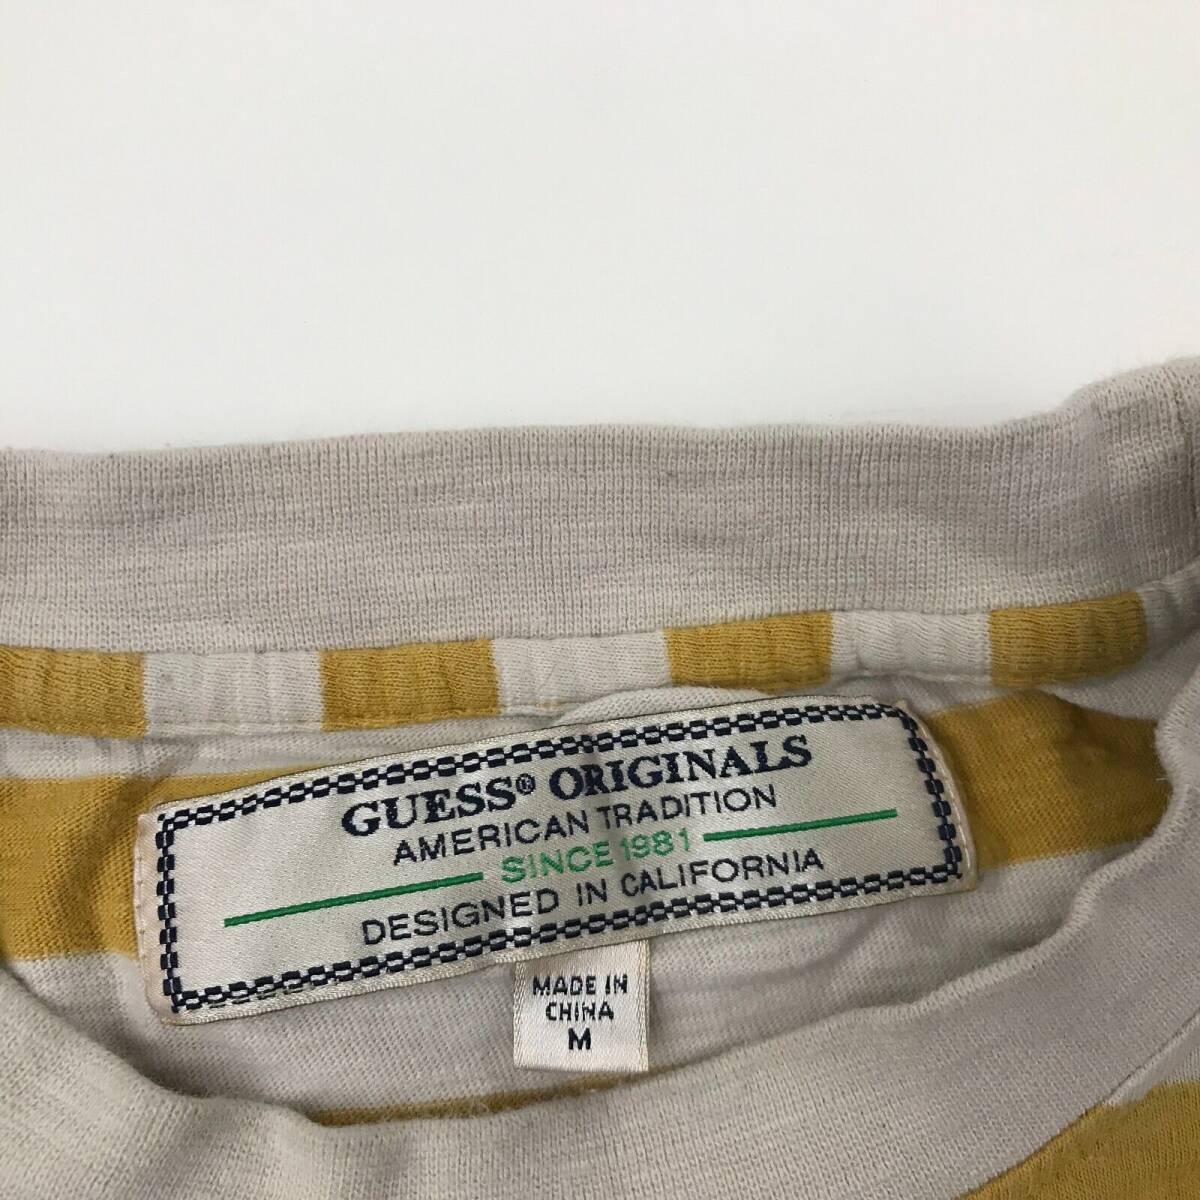 VINTAGE Guess Shirt Size Medium M Yellow White Striped Tee Adult ASAP Rocky 90s 海外 即決_VINTAGE Guess Shir 3